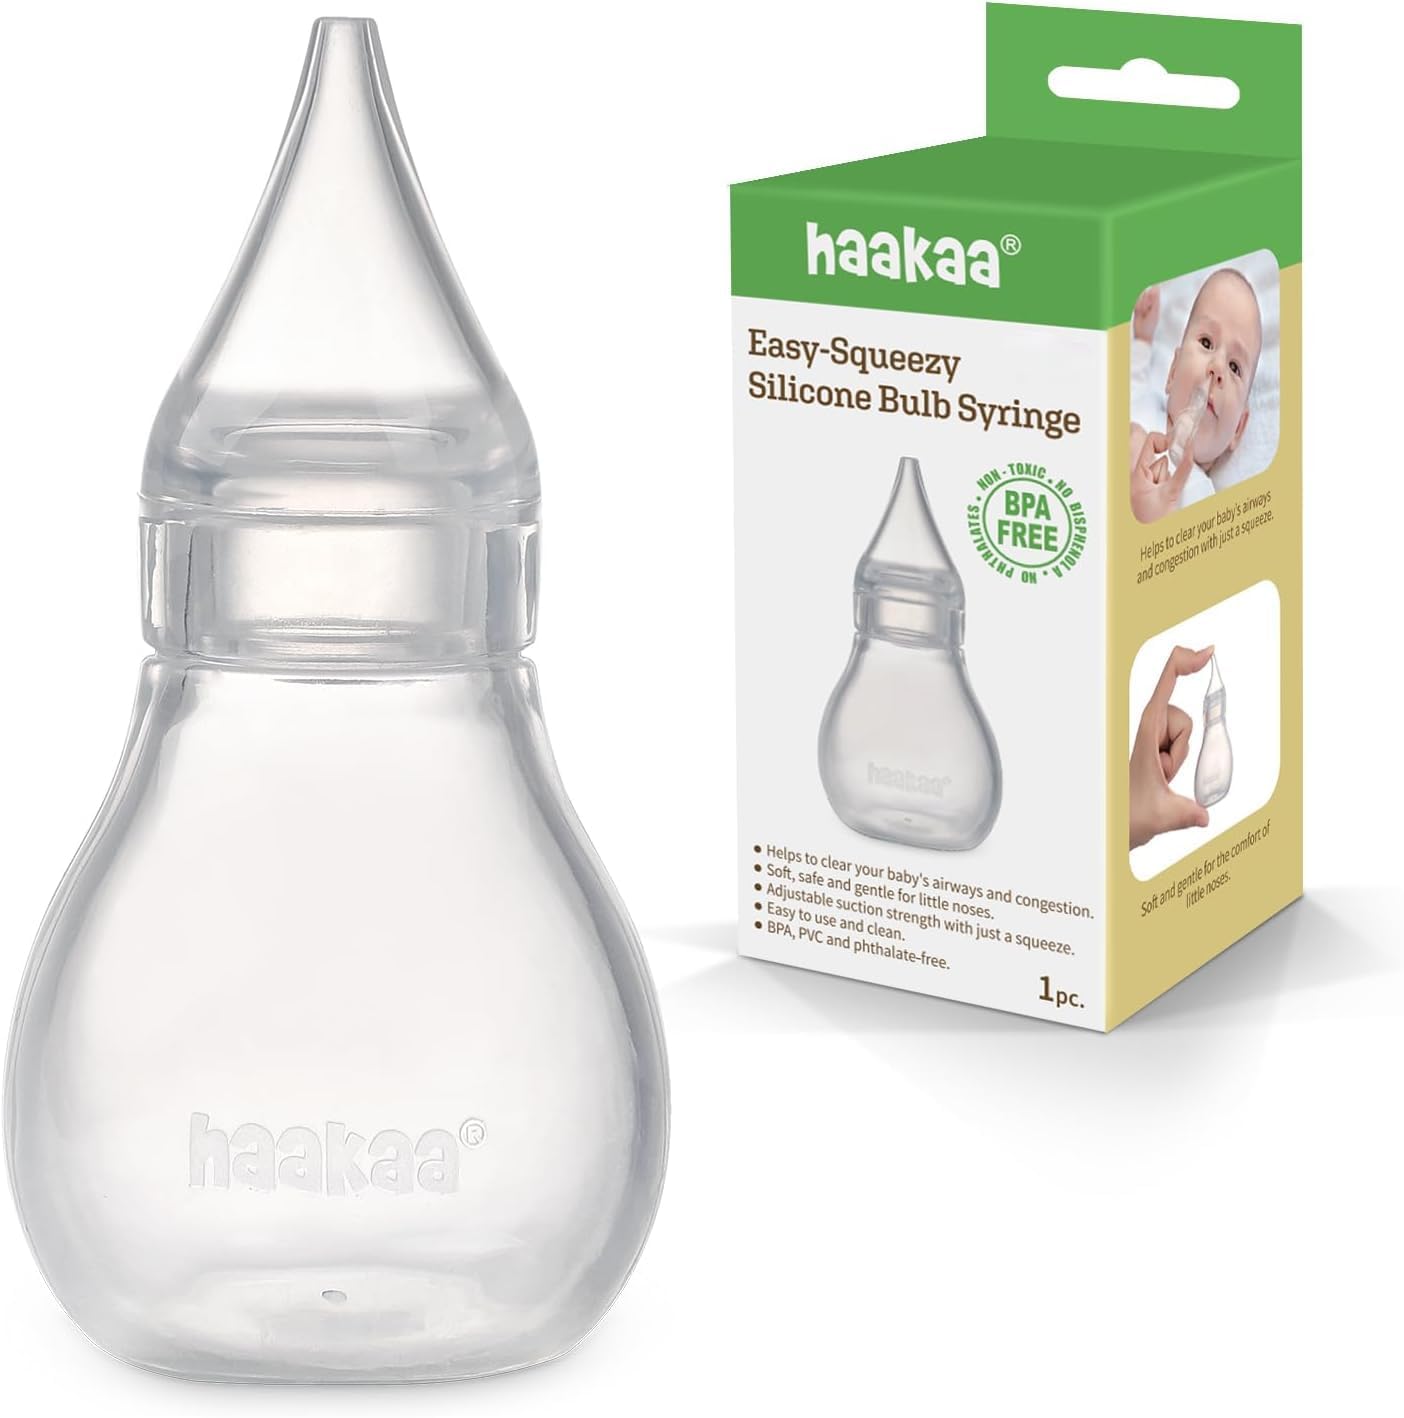 Haakaa Silicone Baby Nasal Aspirator | Nose Bulb Syringe | Easy-Squeezy Baby Nose Cleaner, Newborn Infant &Toddler - BPA Free Silicone